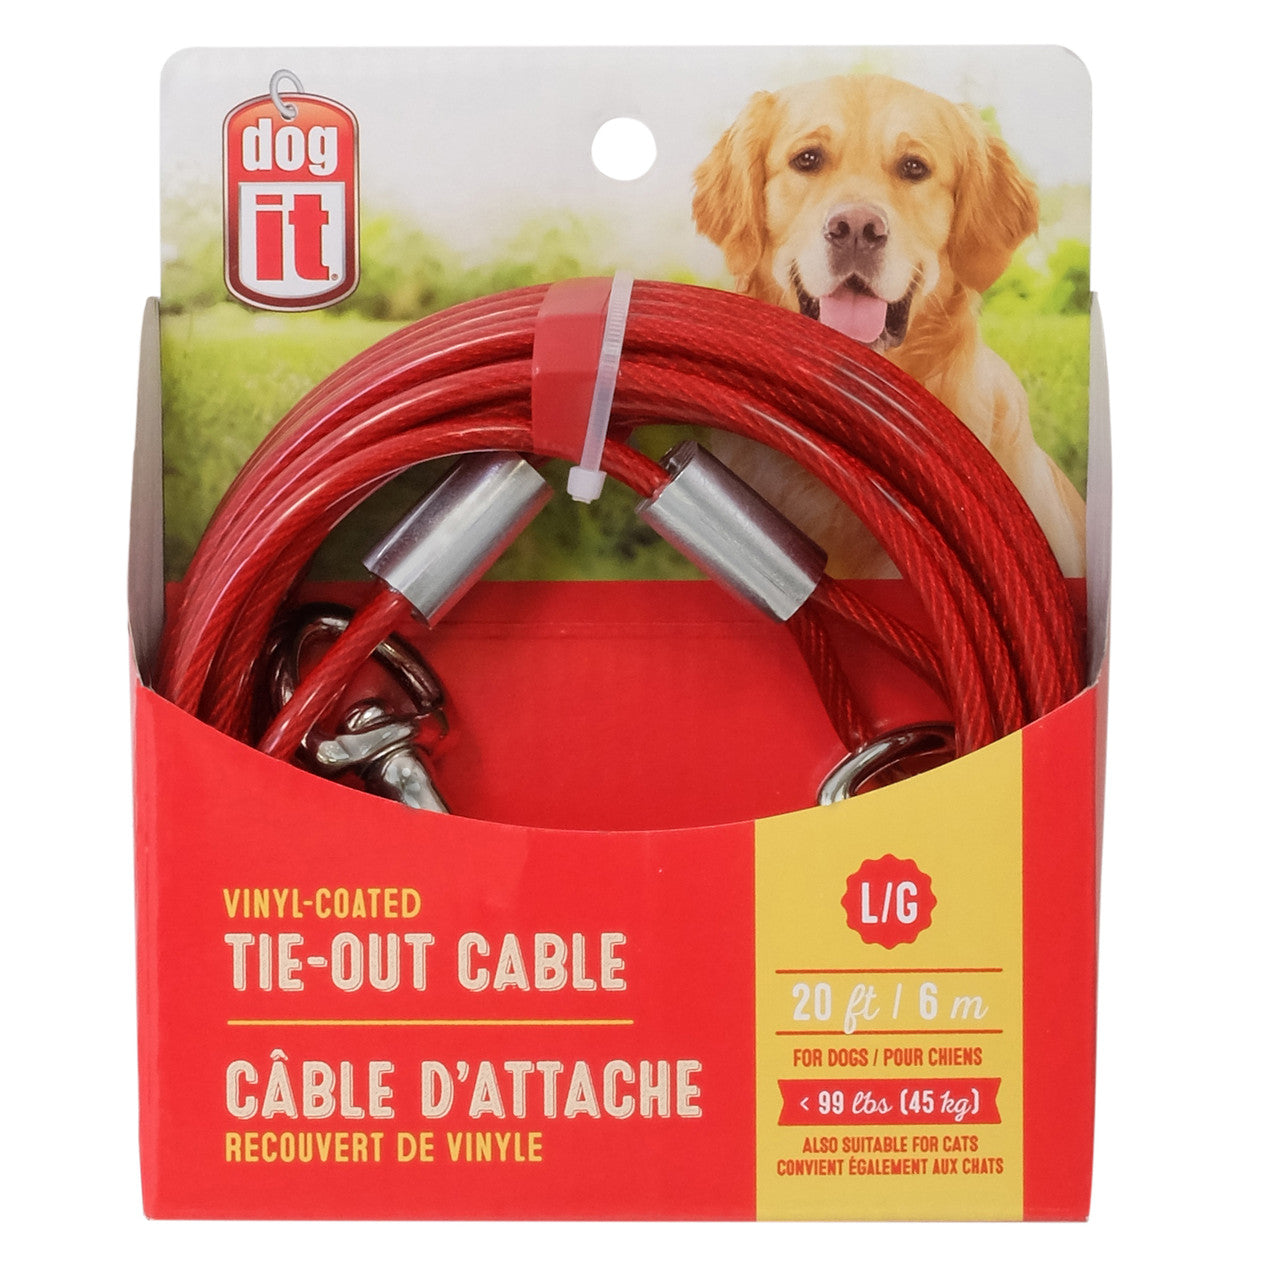 Dogit Tie-Out Cable, Large, 20', Red 022517717936